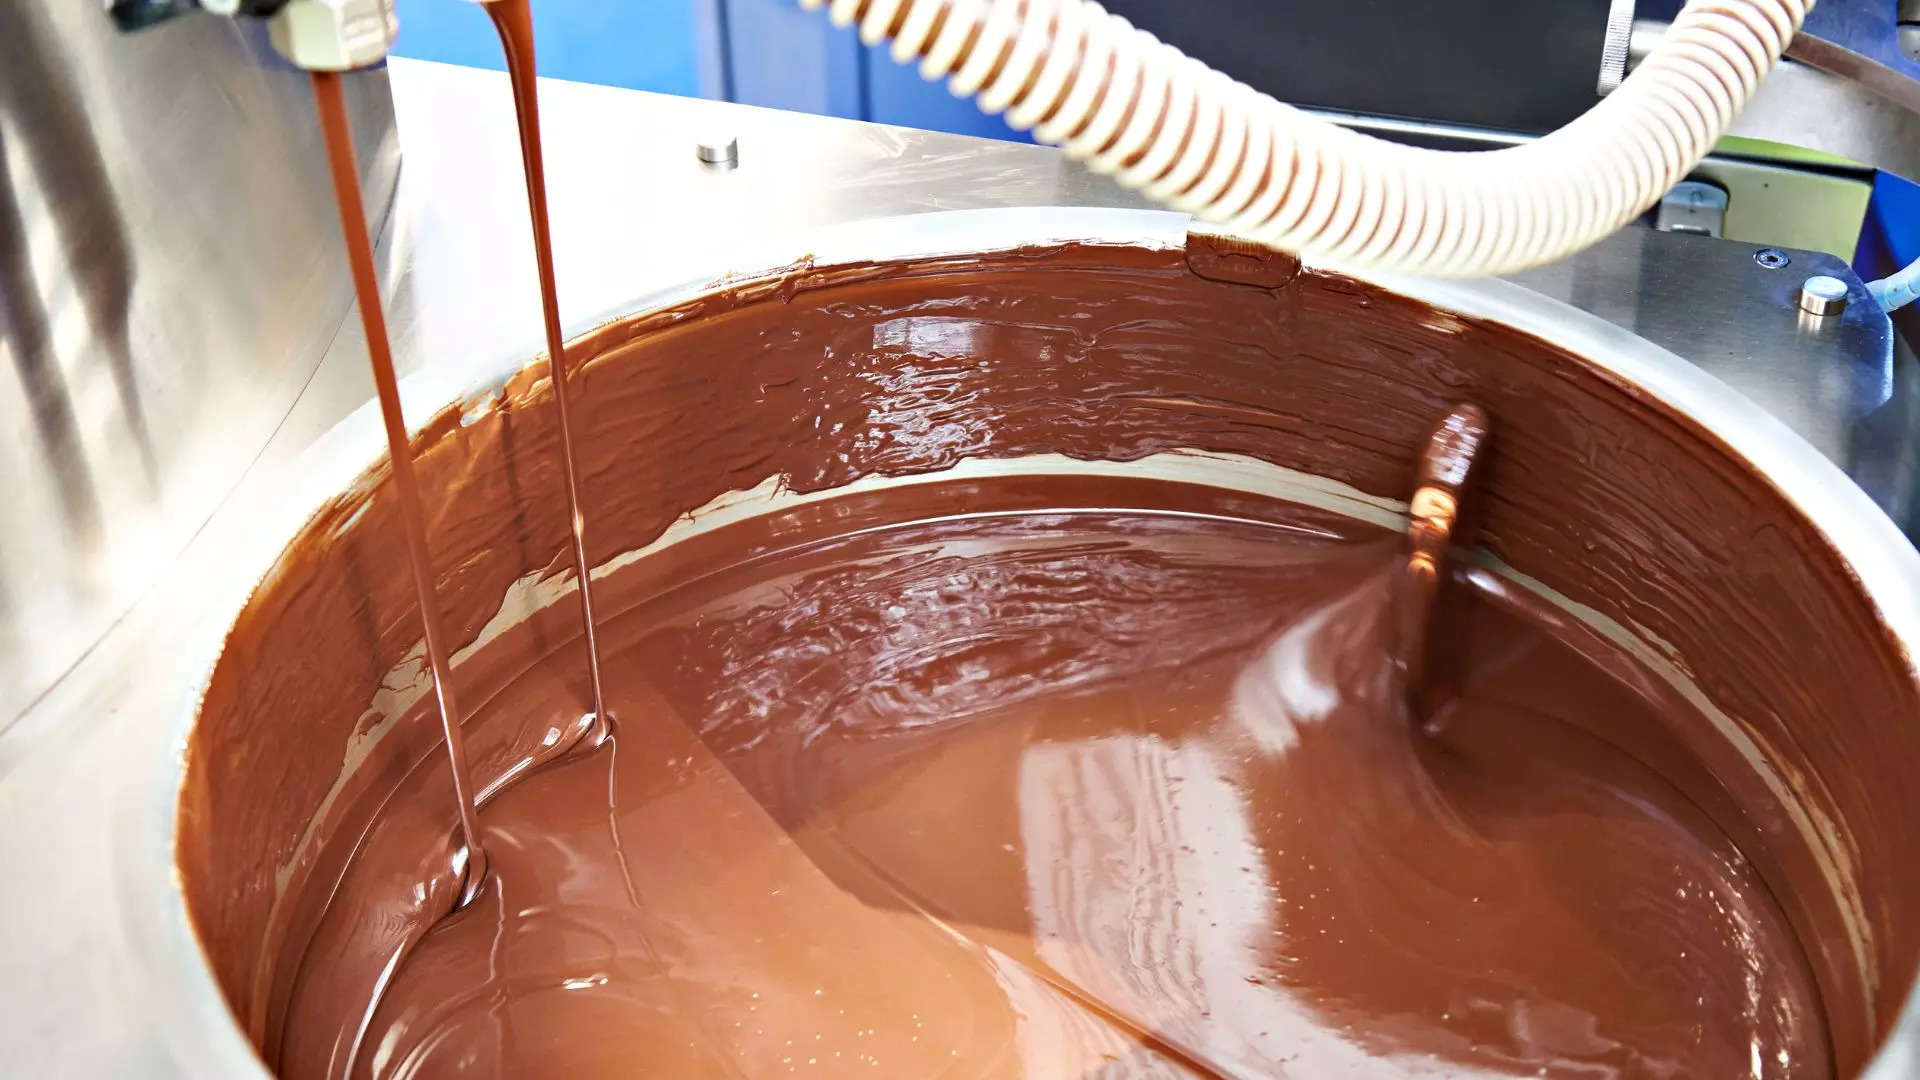 Workers fall into chocolate tank at Mars factory in US rescued from waist-deep chocolate